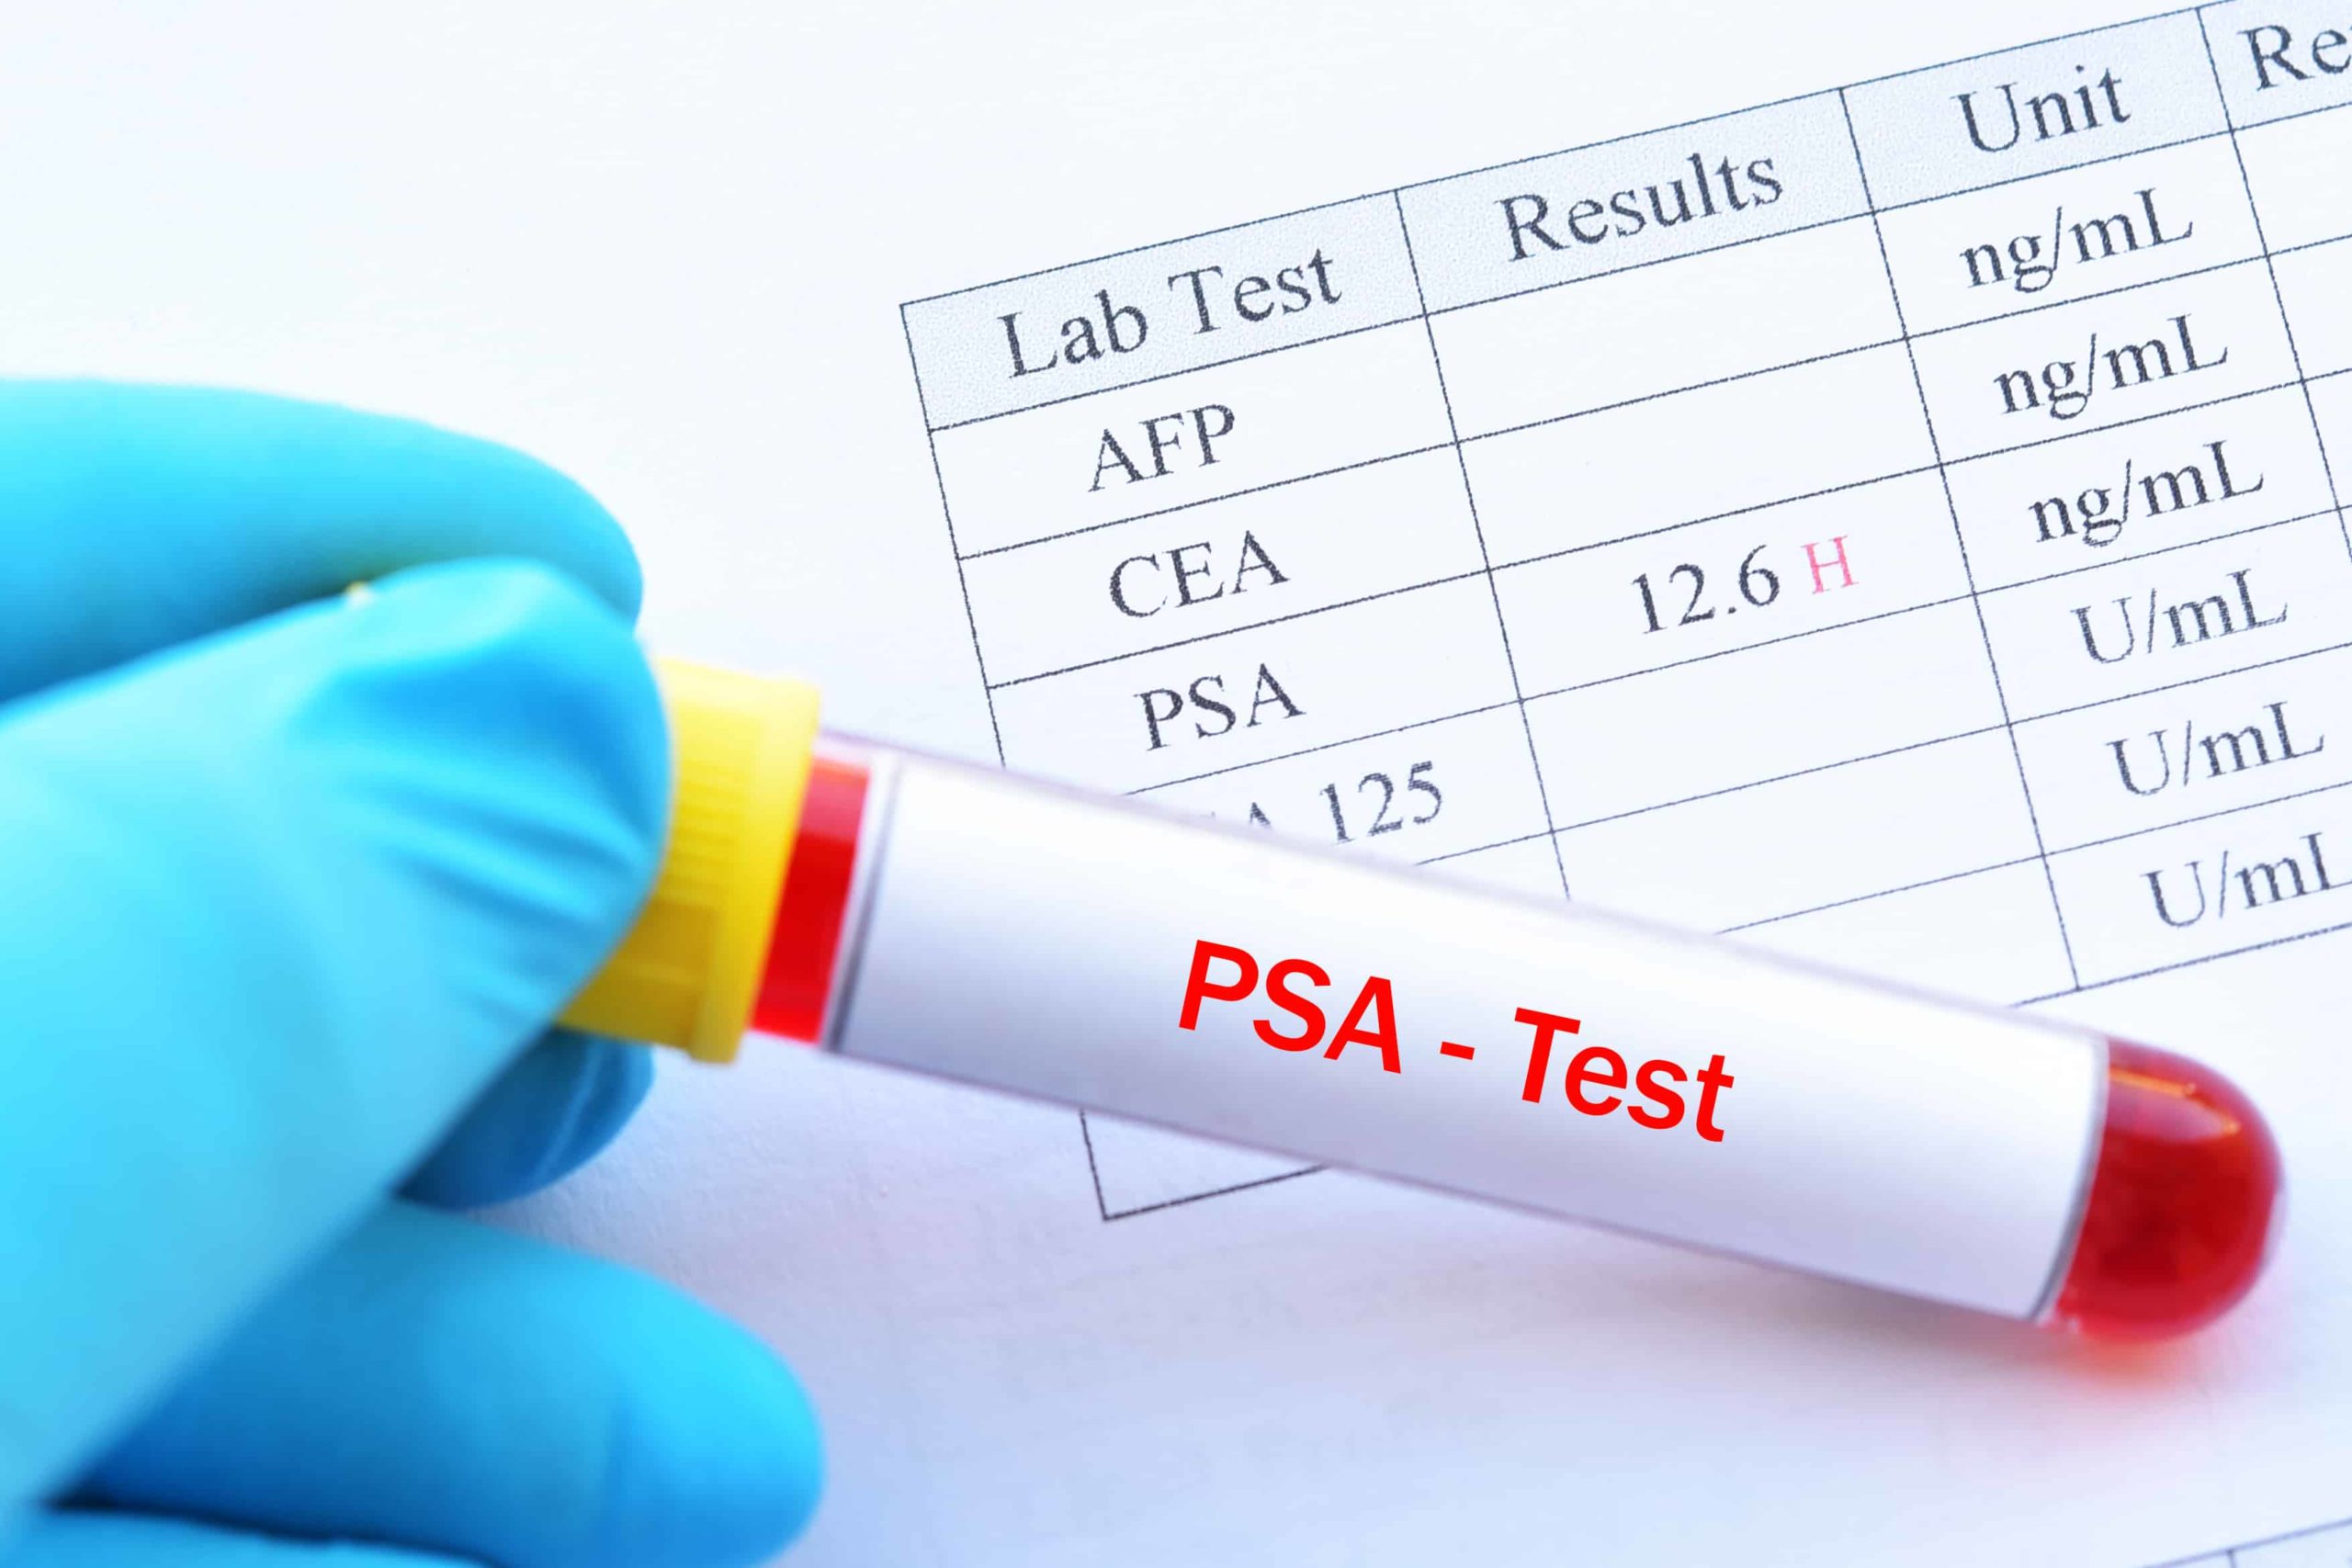 Would prostate cancer show up in a blood test